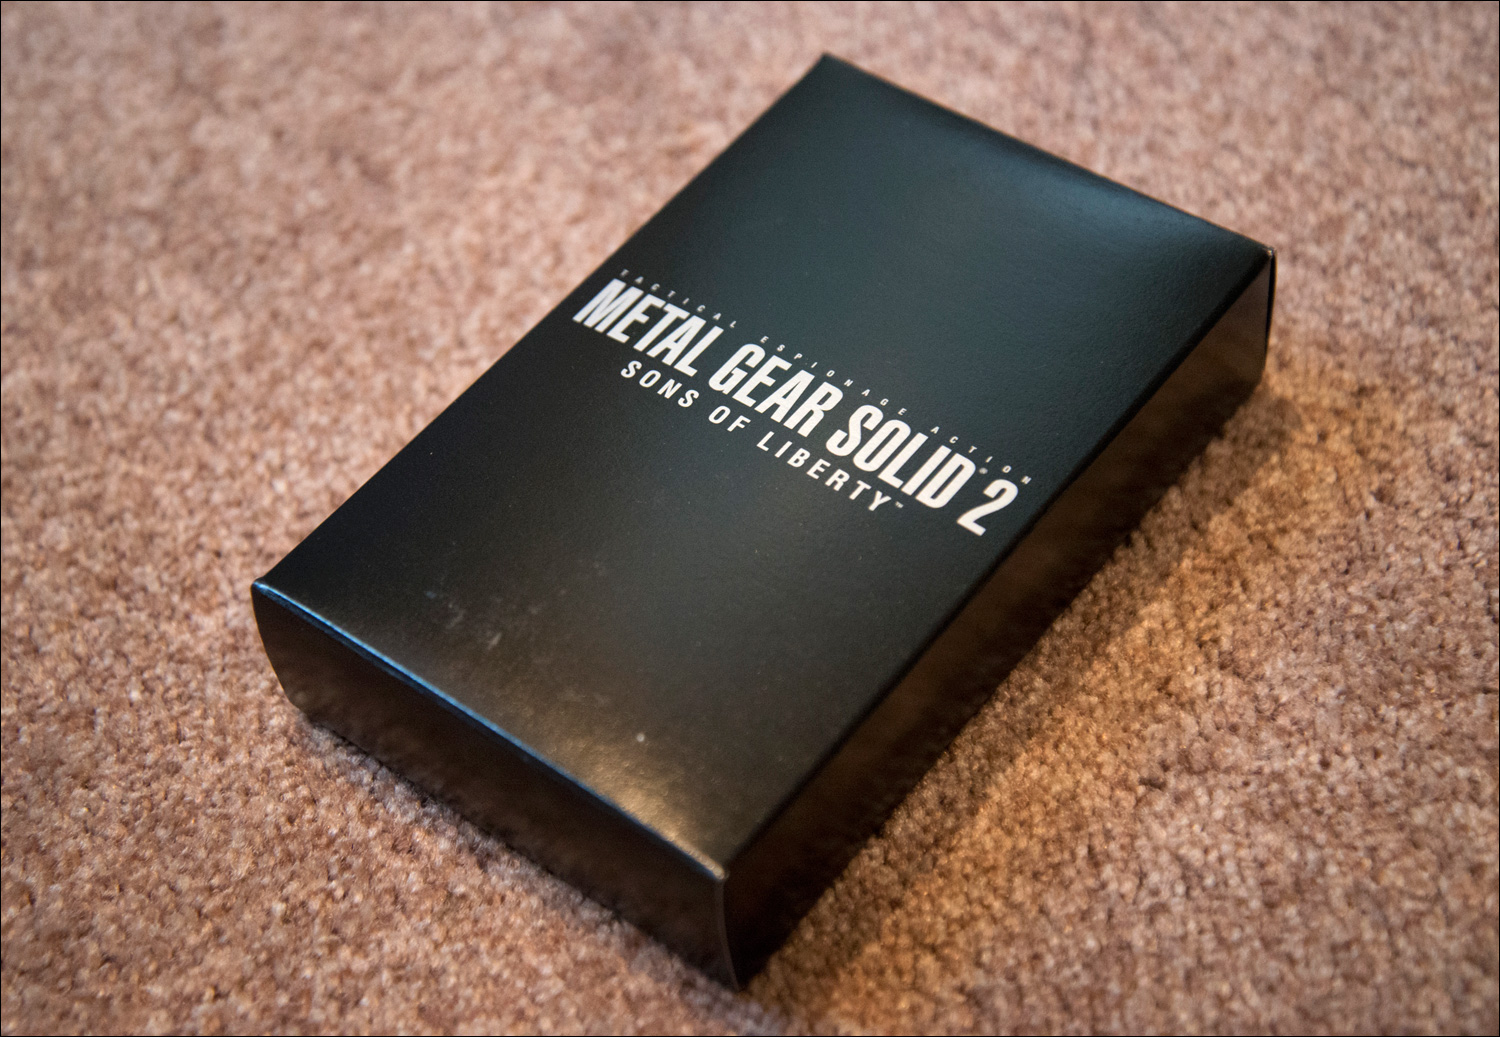 Metal-Gear-Solid-2-Sons-of-Liberty-Premium-Package-Snake-Figure-Box